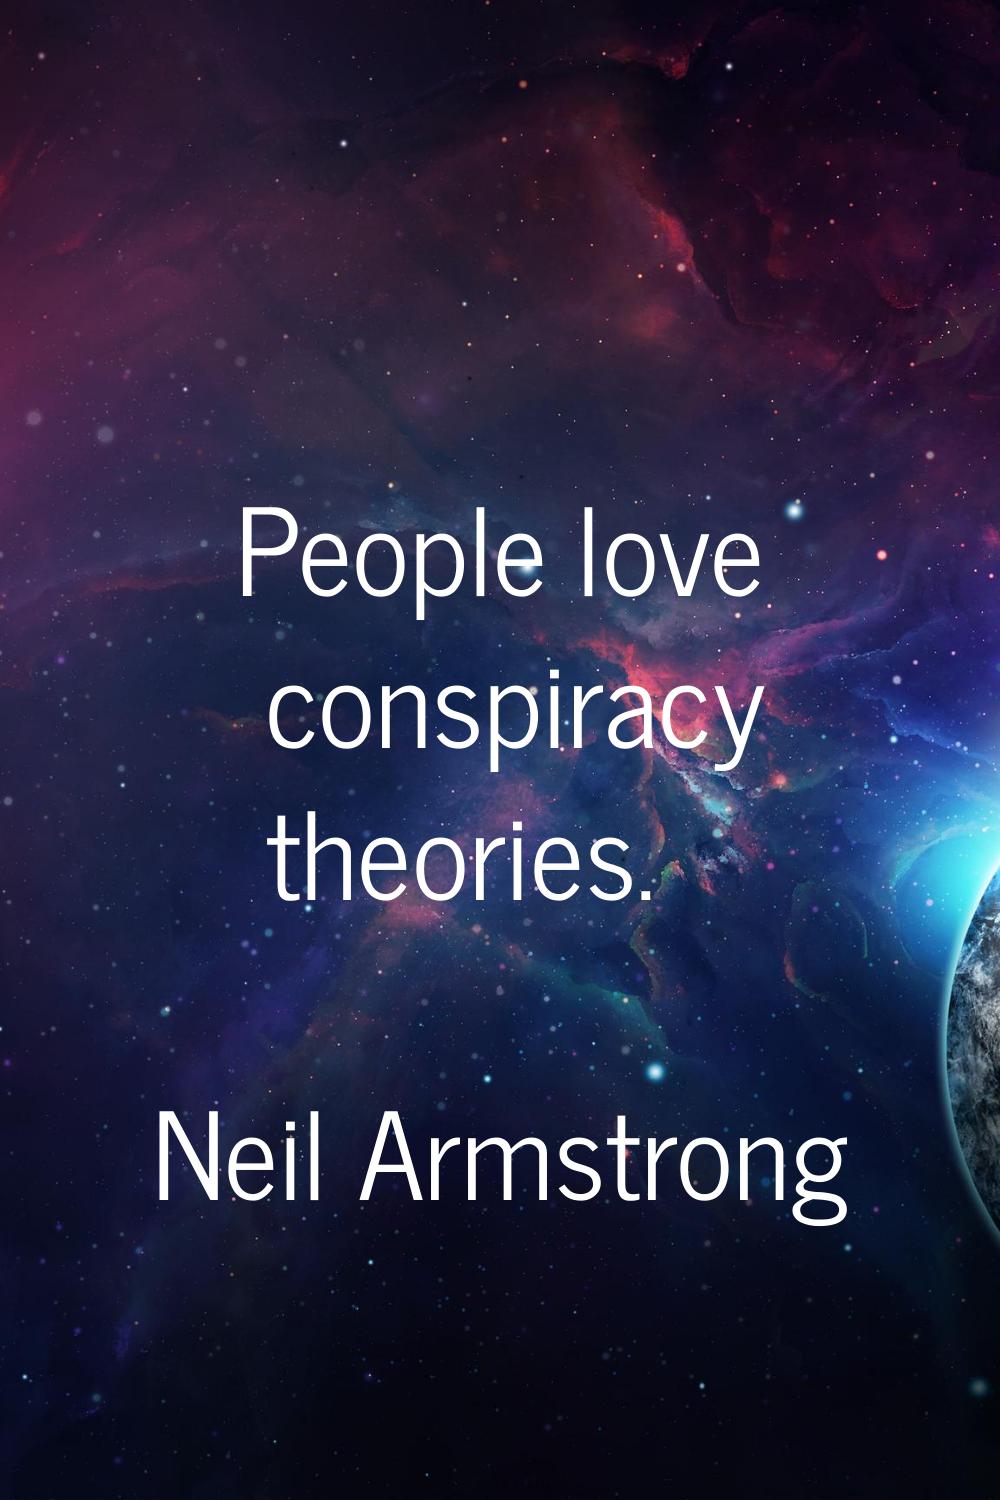 People love conspiracy theories.